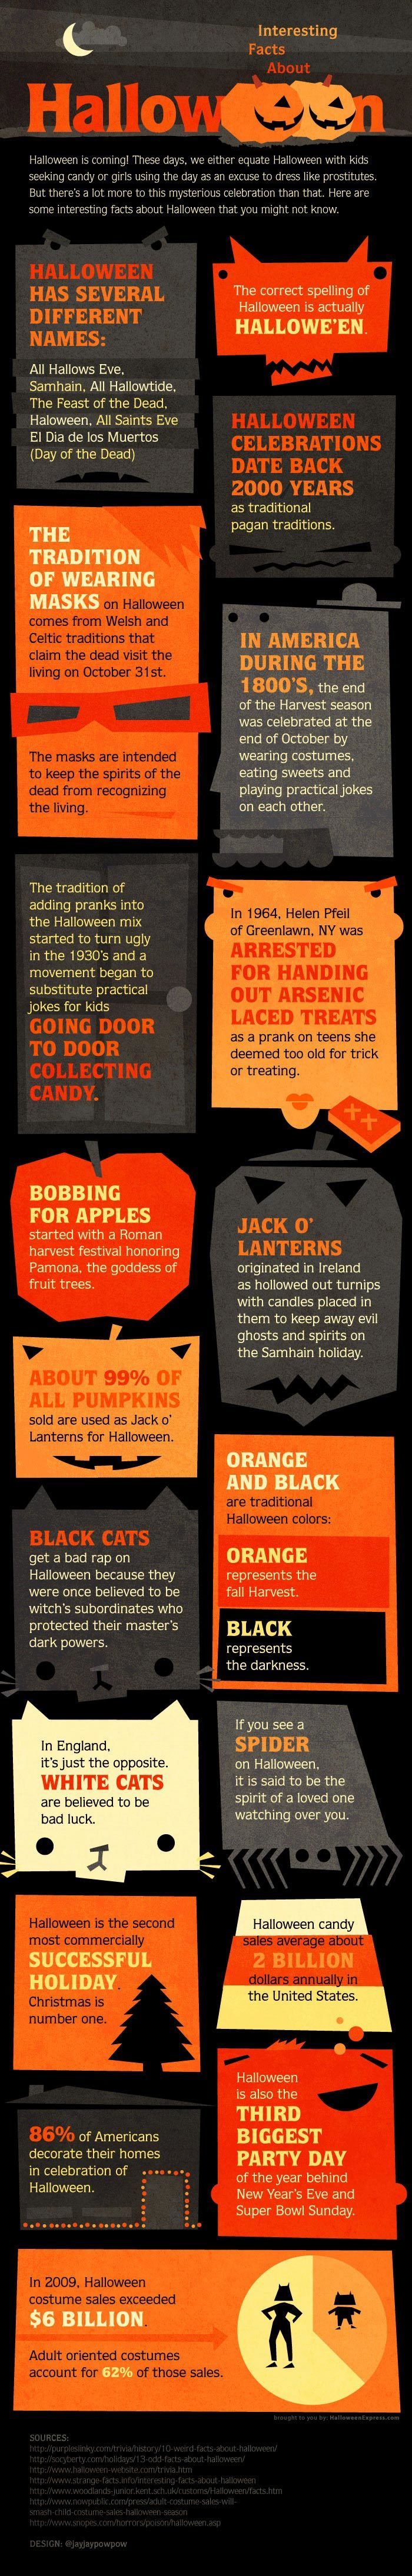 Interesting Facts About Halloween Infographic